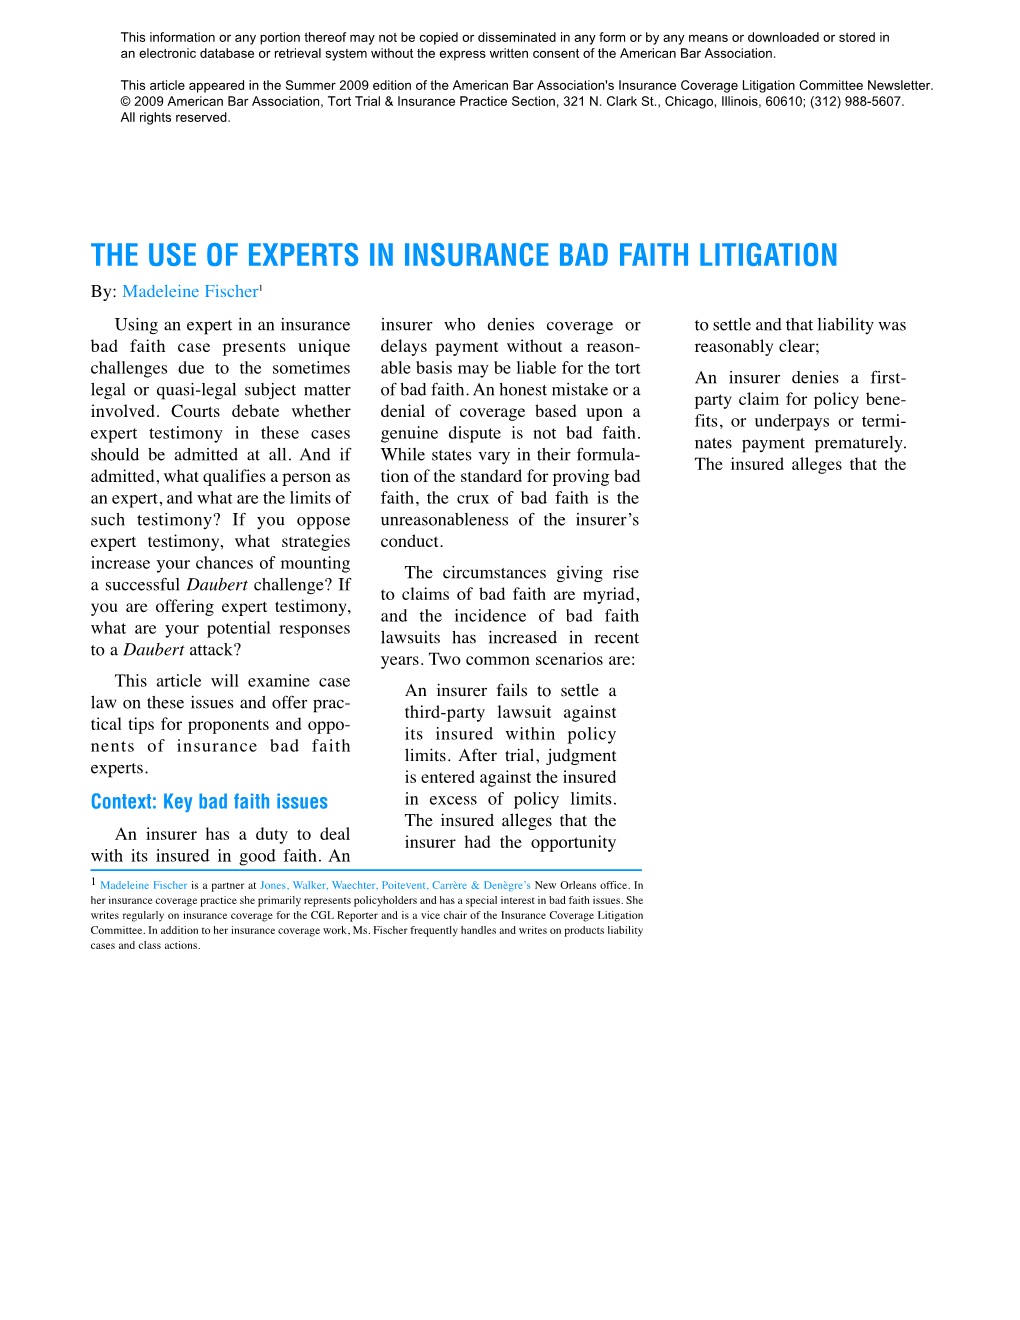 The Use of Experts in Insurance Bad Faith Litigation